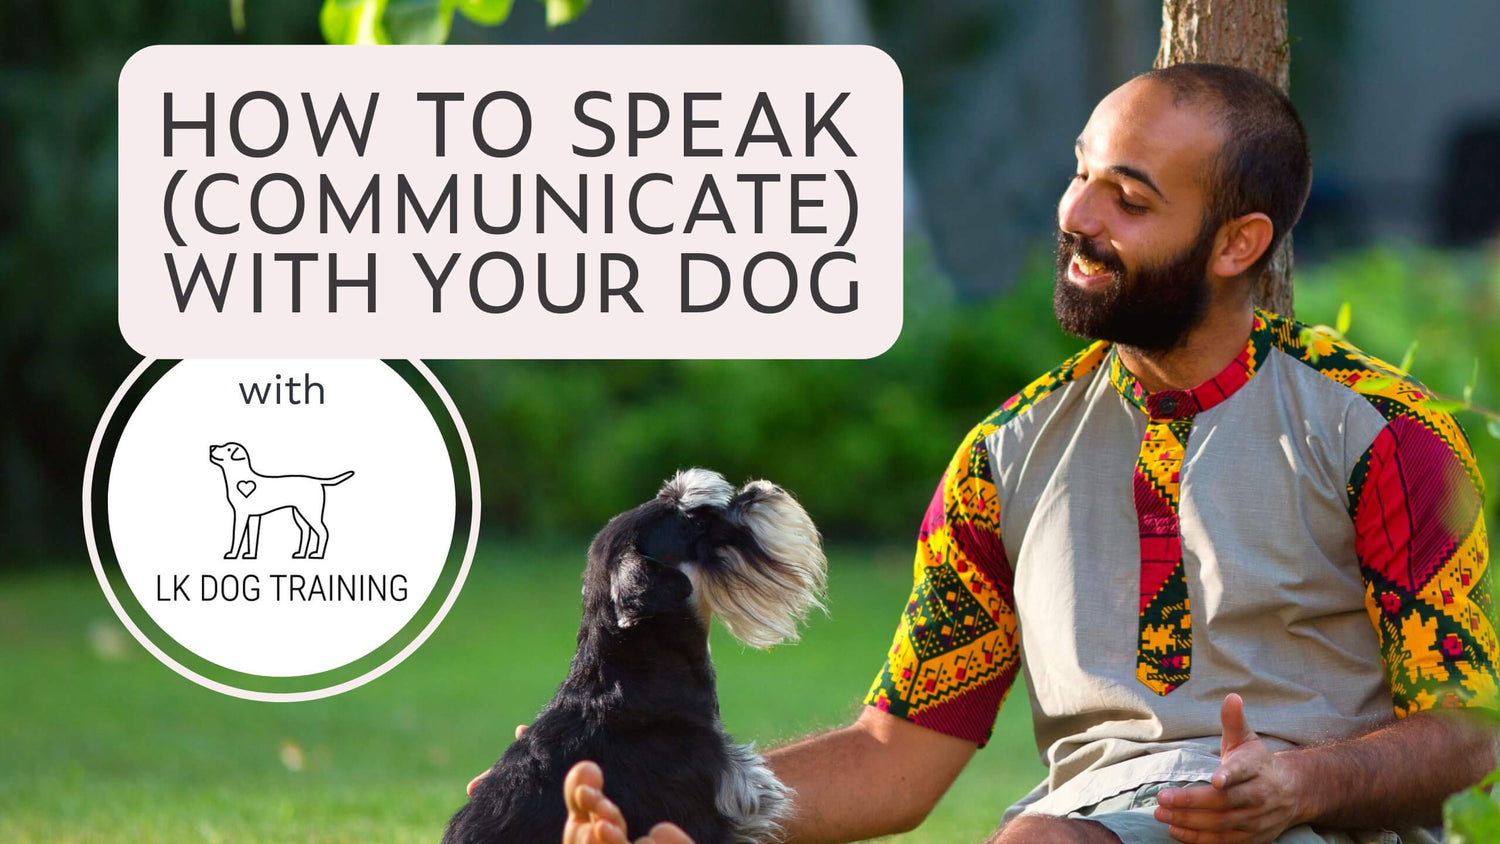 A man sitting leaned against a tree talking to his dog and a box with text “How to speak (communicate) with your dog”